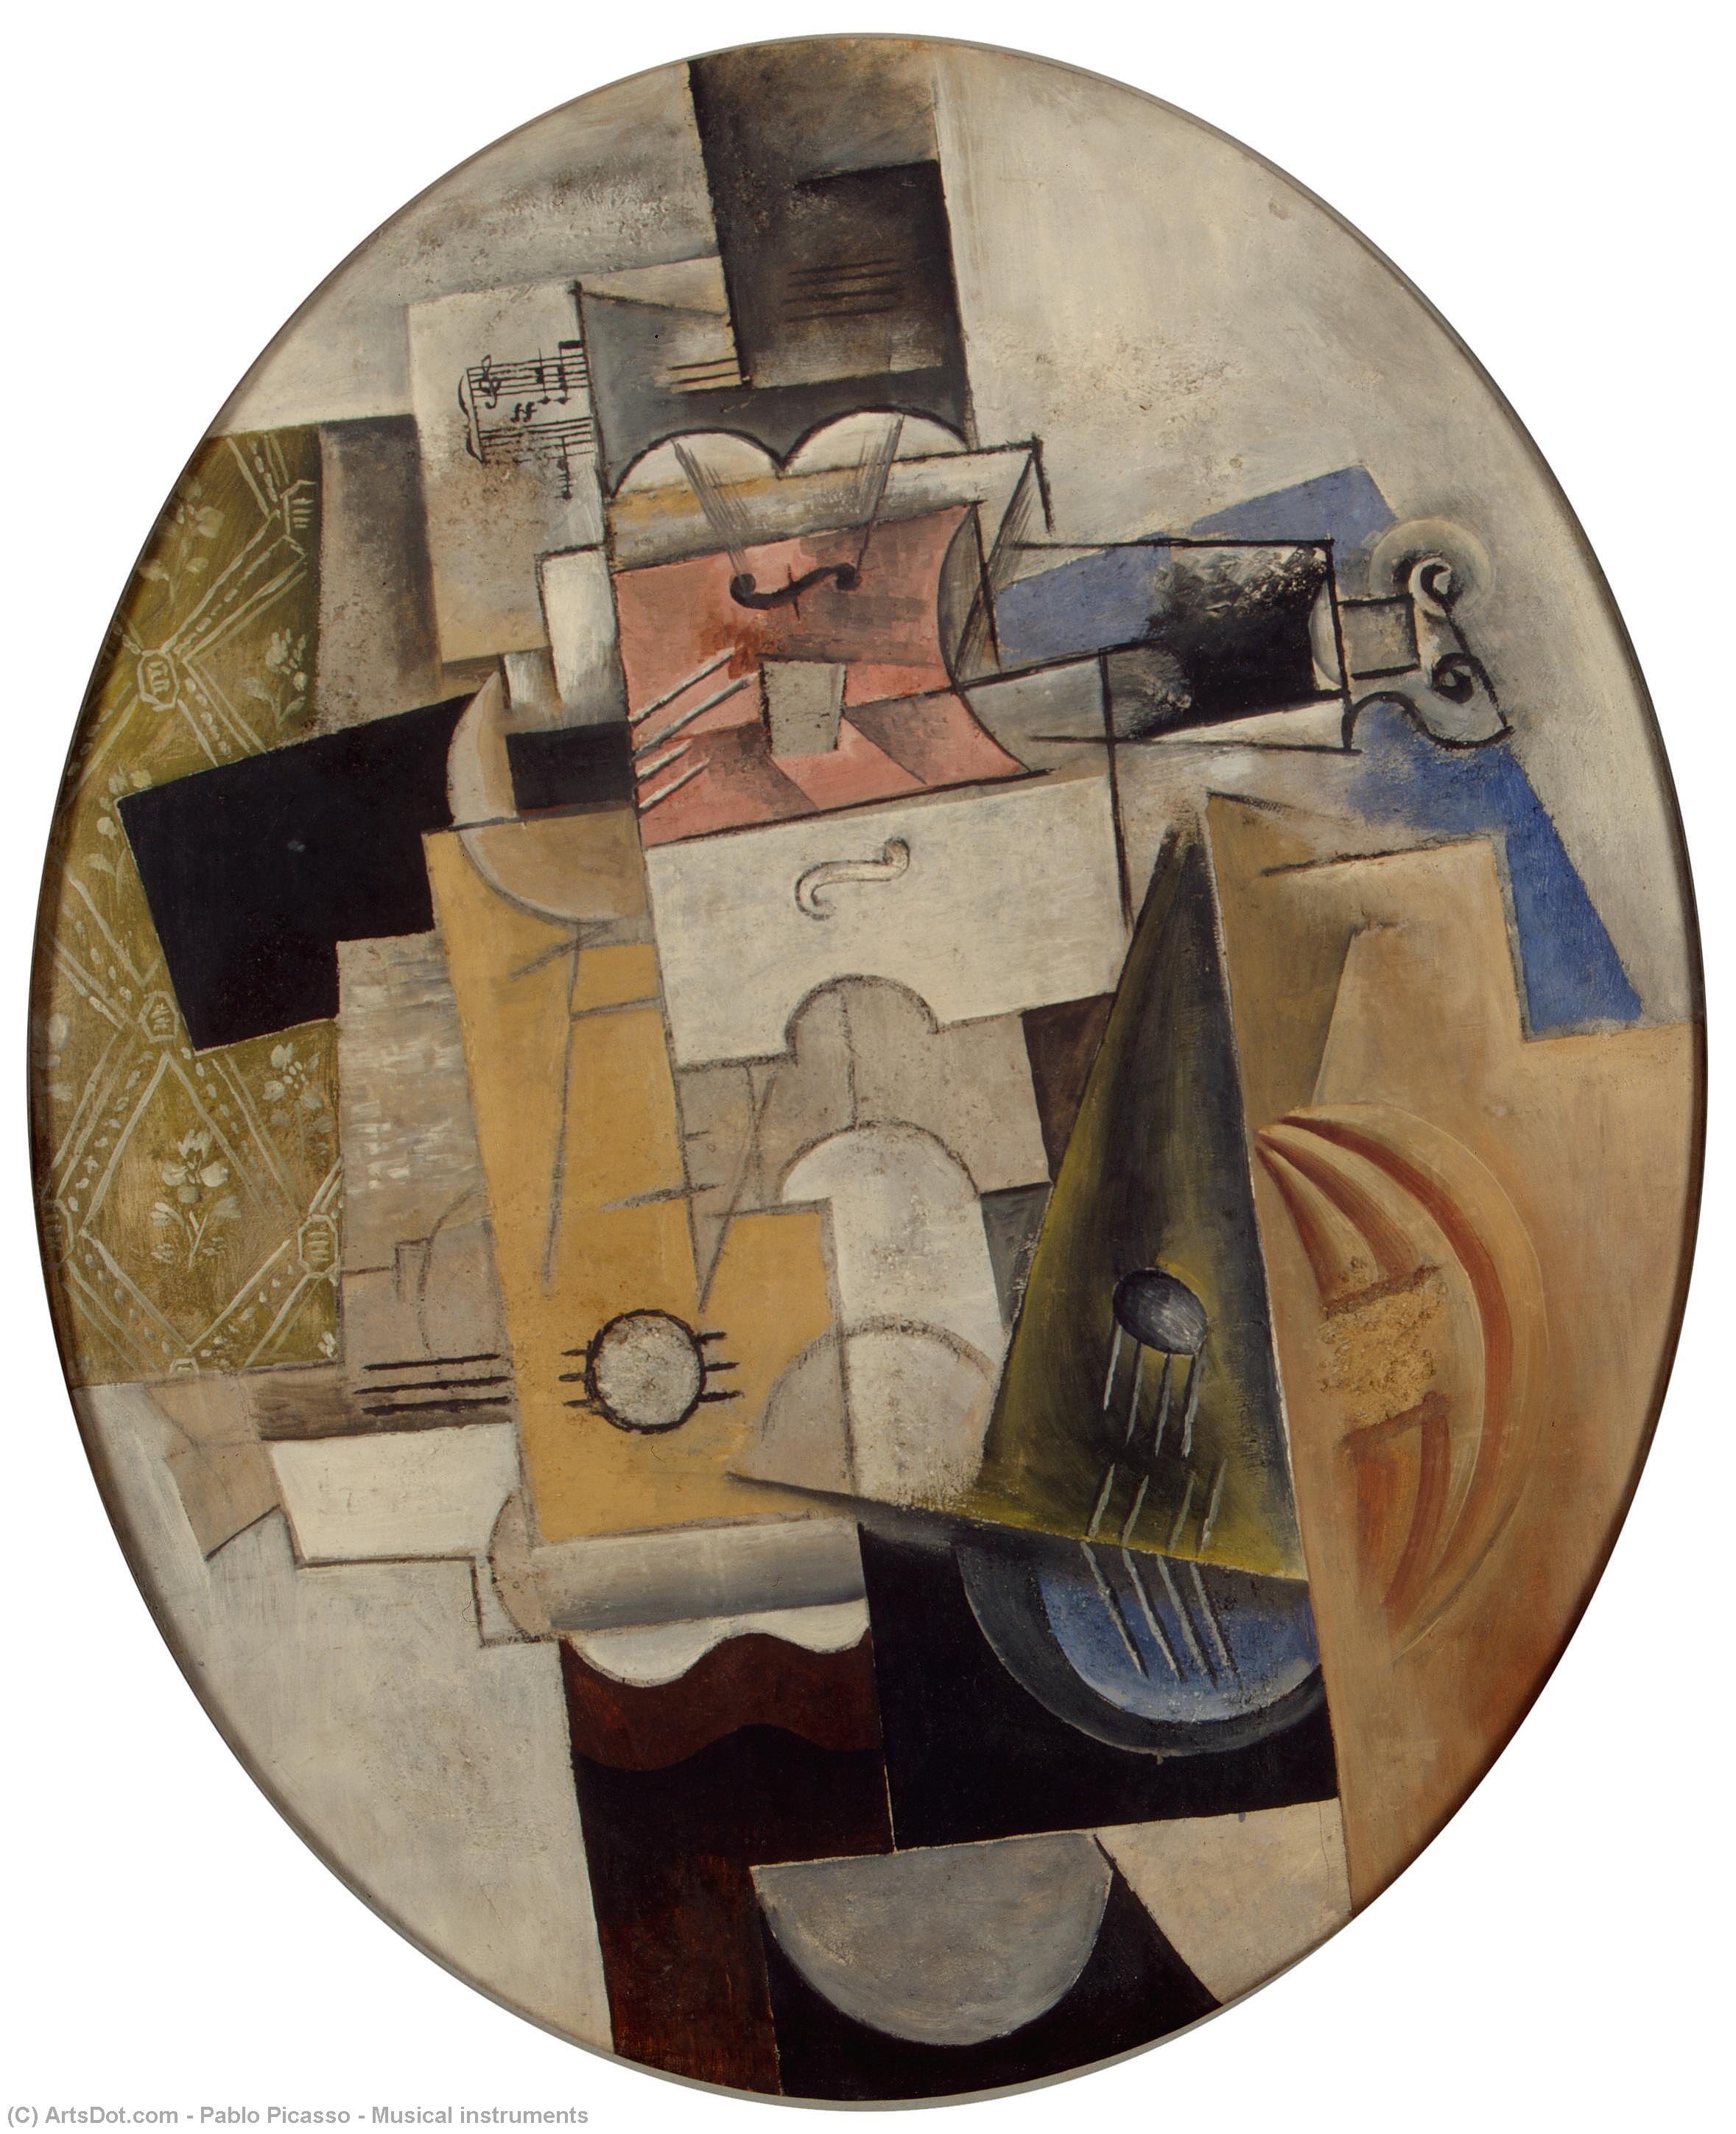 WikiOO.org - 백과 사전 - 회화, 삽화 Pablo Picasso - Musical instruments